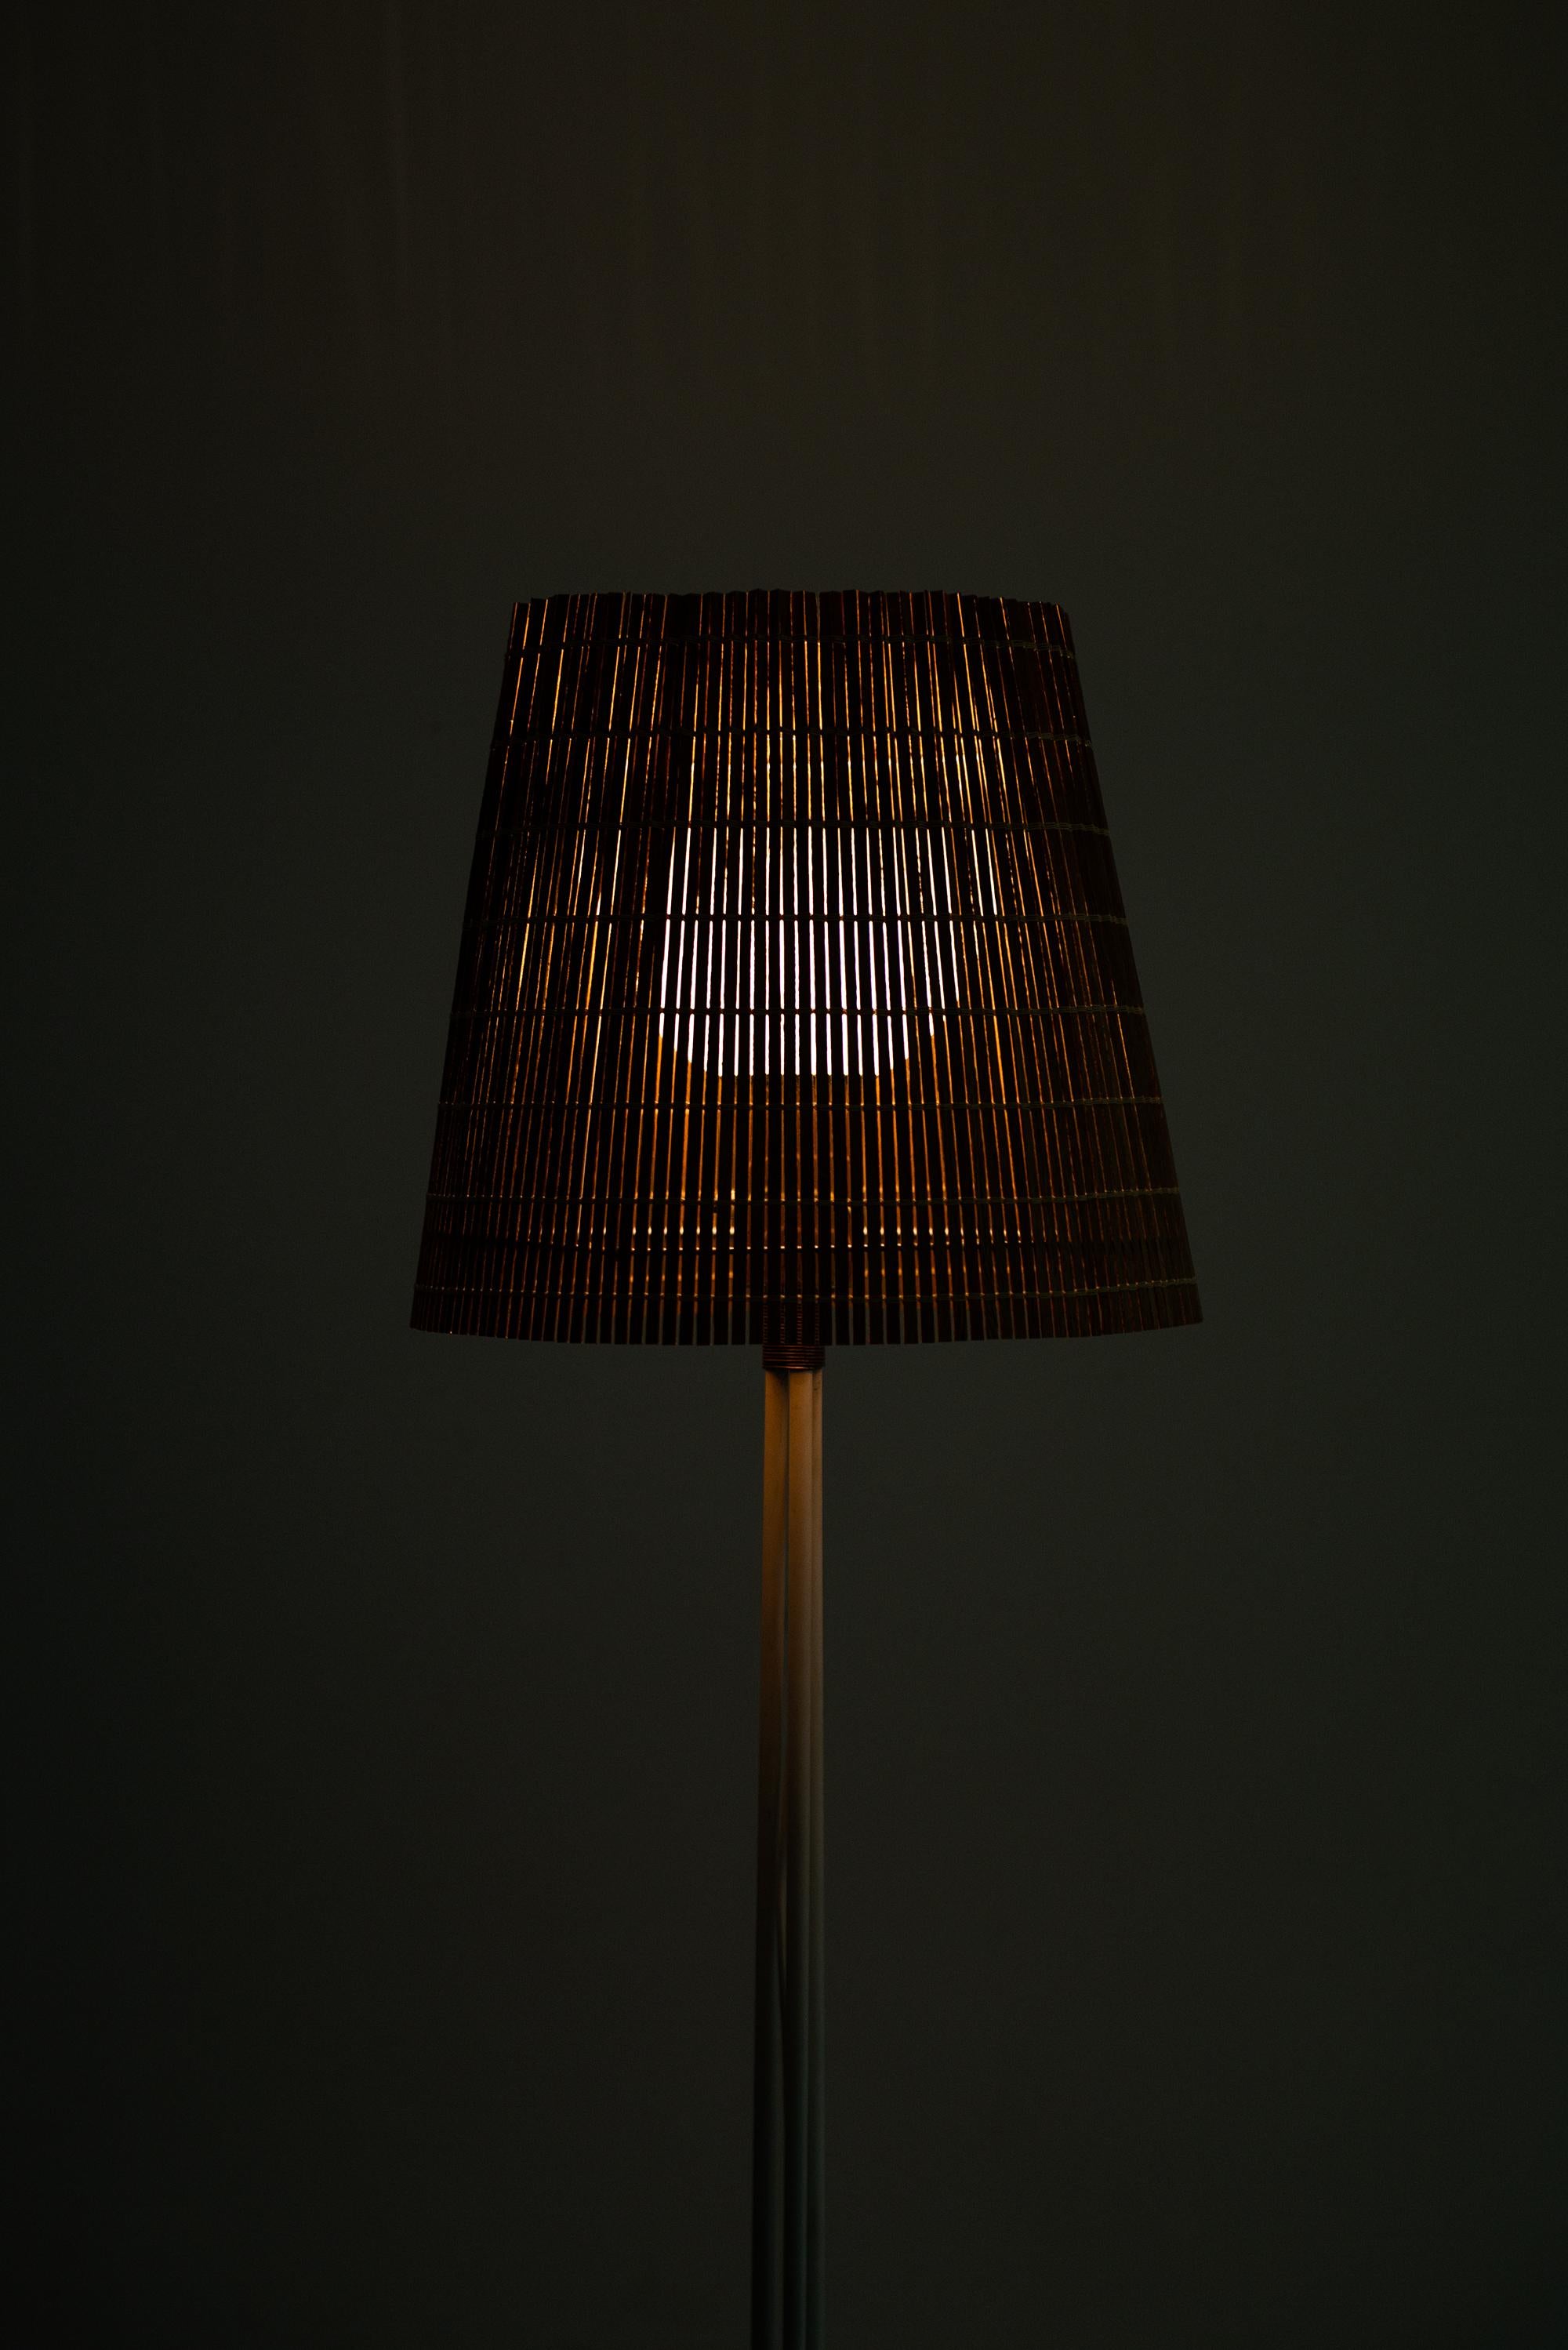 Mid-20th Century Lisa Johansson-Pape Floor Lamps Model 30-058 by Orno in Finland For Sale